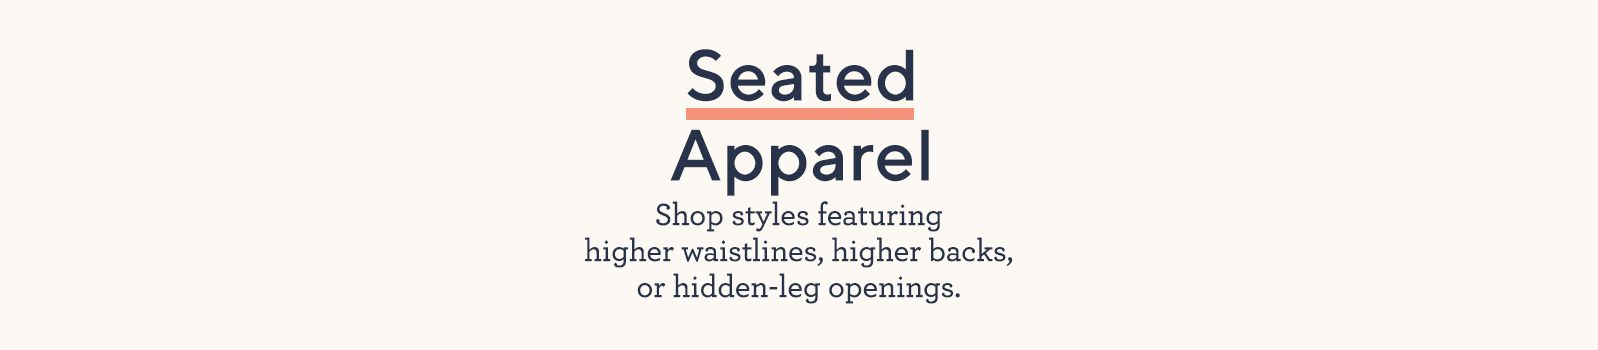 Seated Apparel.  Shop styles featuring higher waistlines, higher backs, or hidden-leg openings.